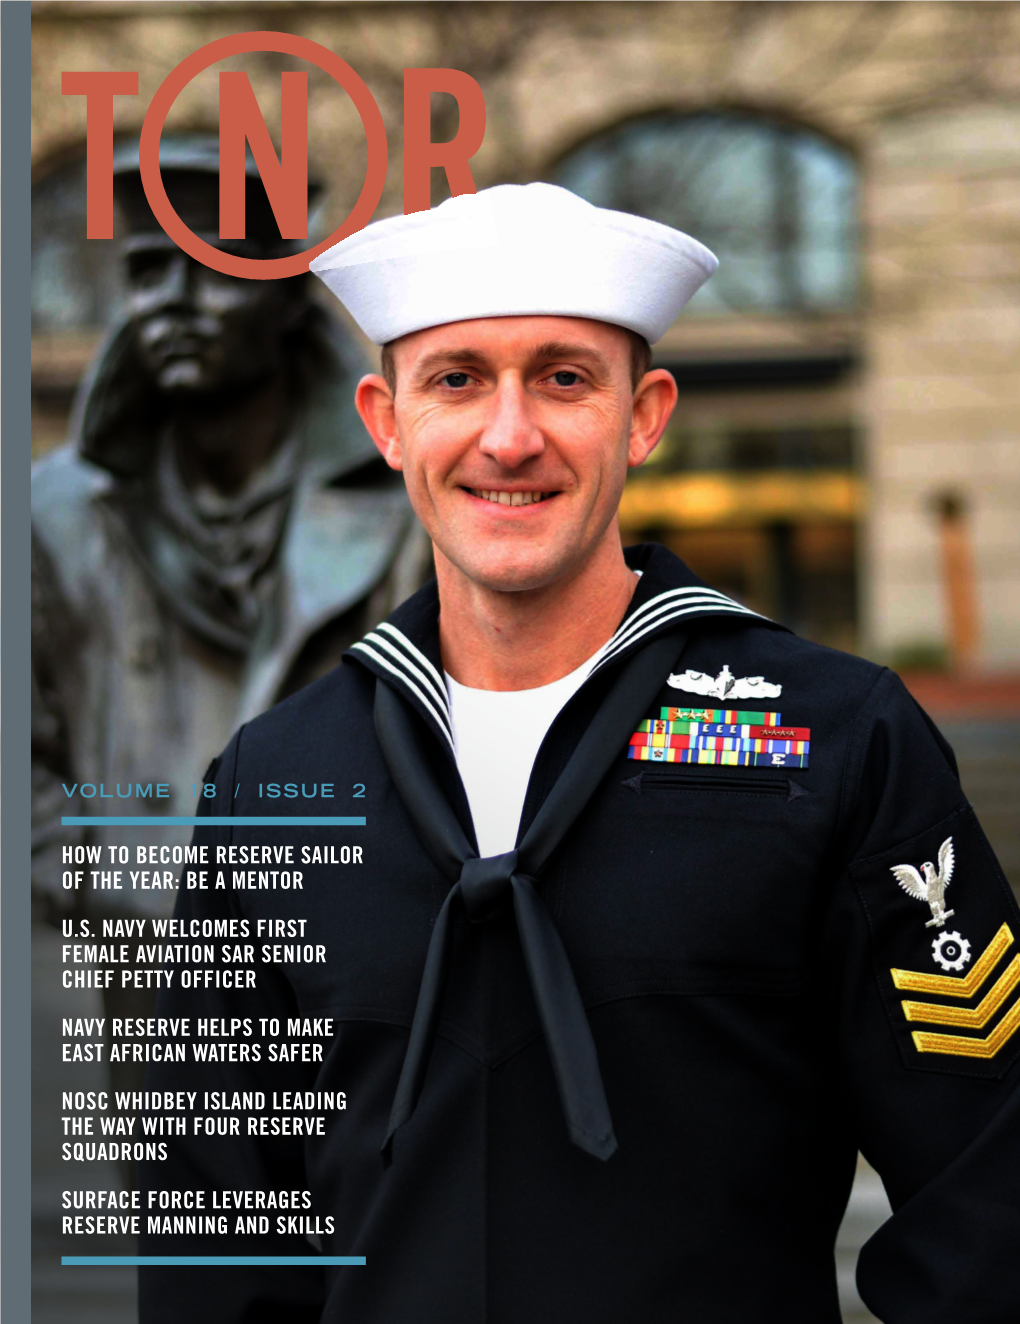 How to Become Reserve Sailor of the Year: Be a Mentor